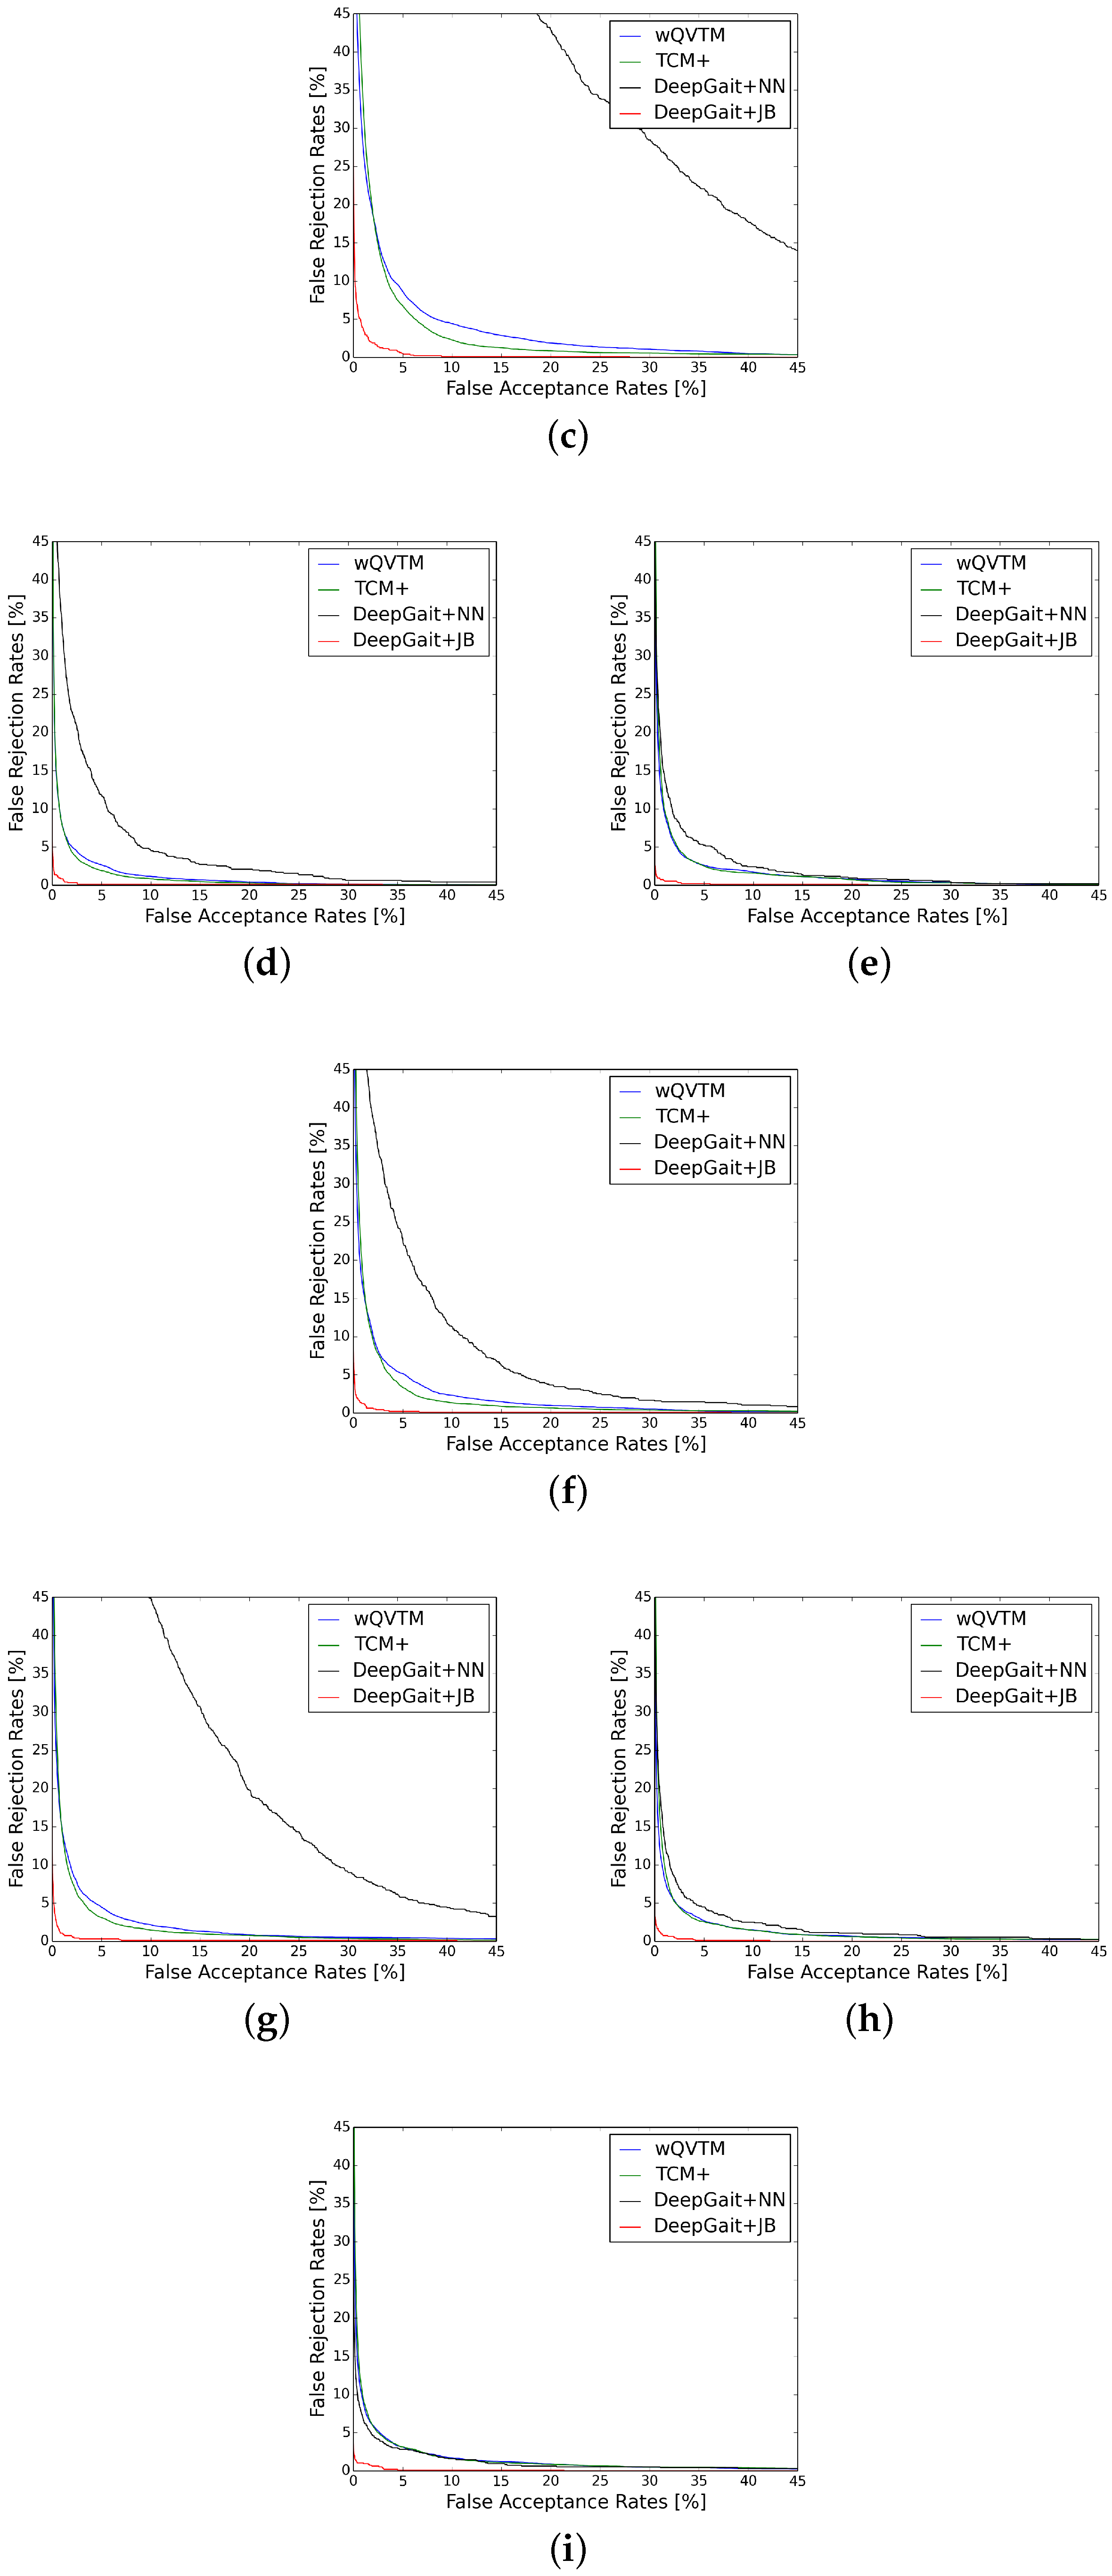 Applied Sciences Free Full Text Deepgait A Learning Deep Convolutional Representation For View Invariant Gait Recognition Using Joint Bayesian Html